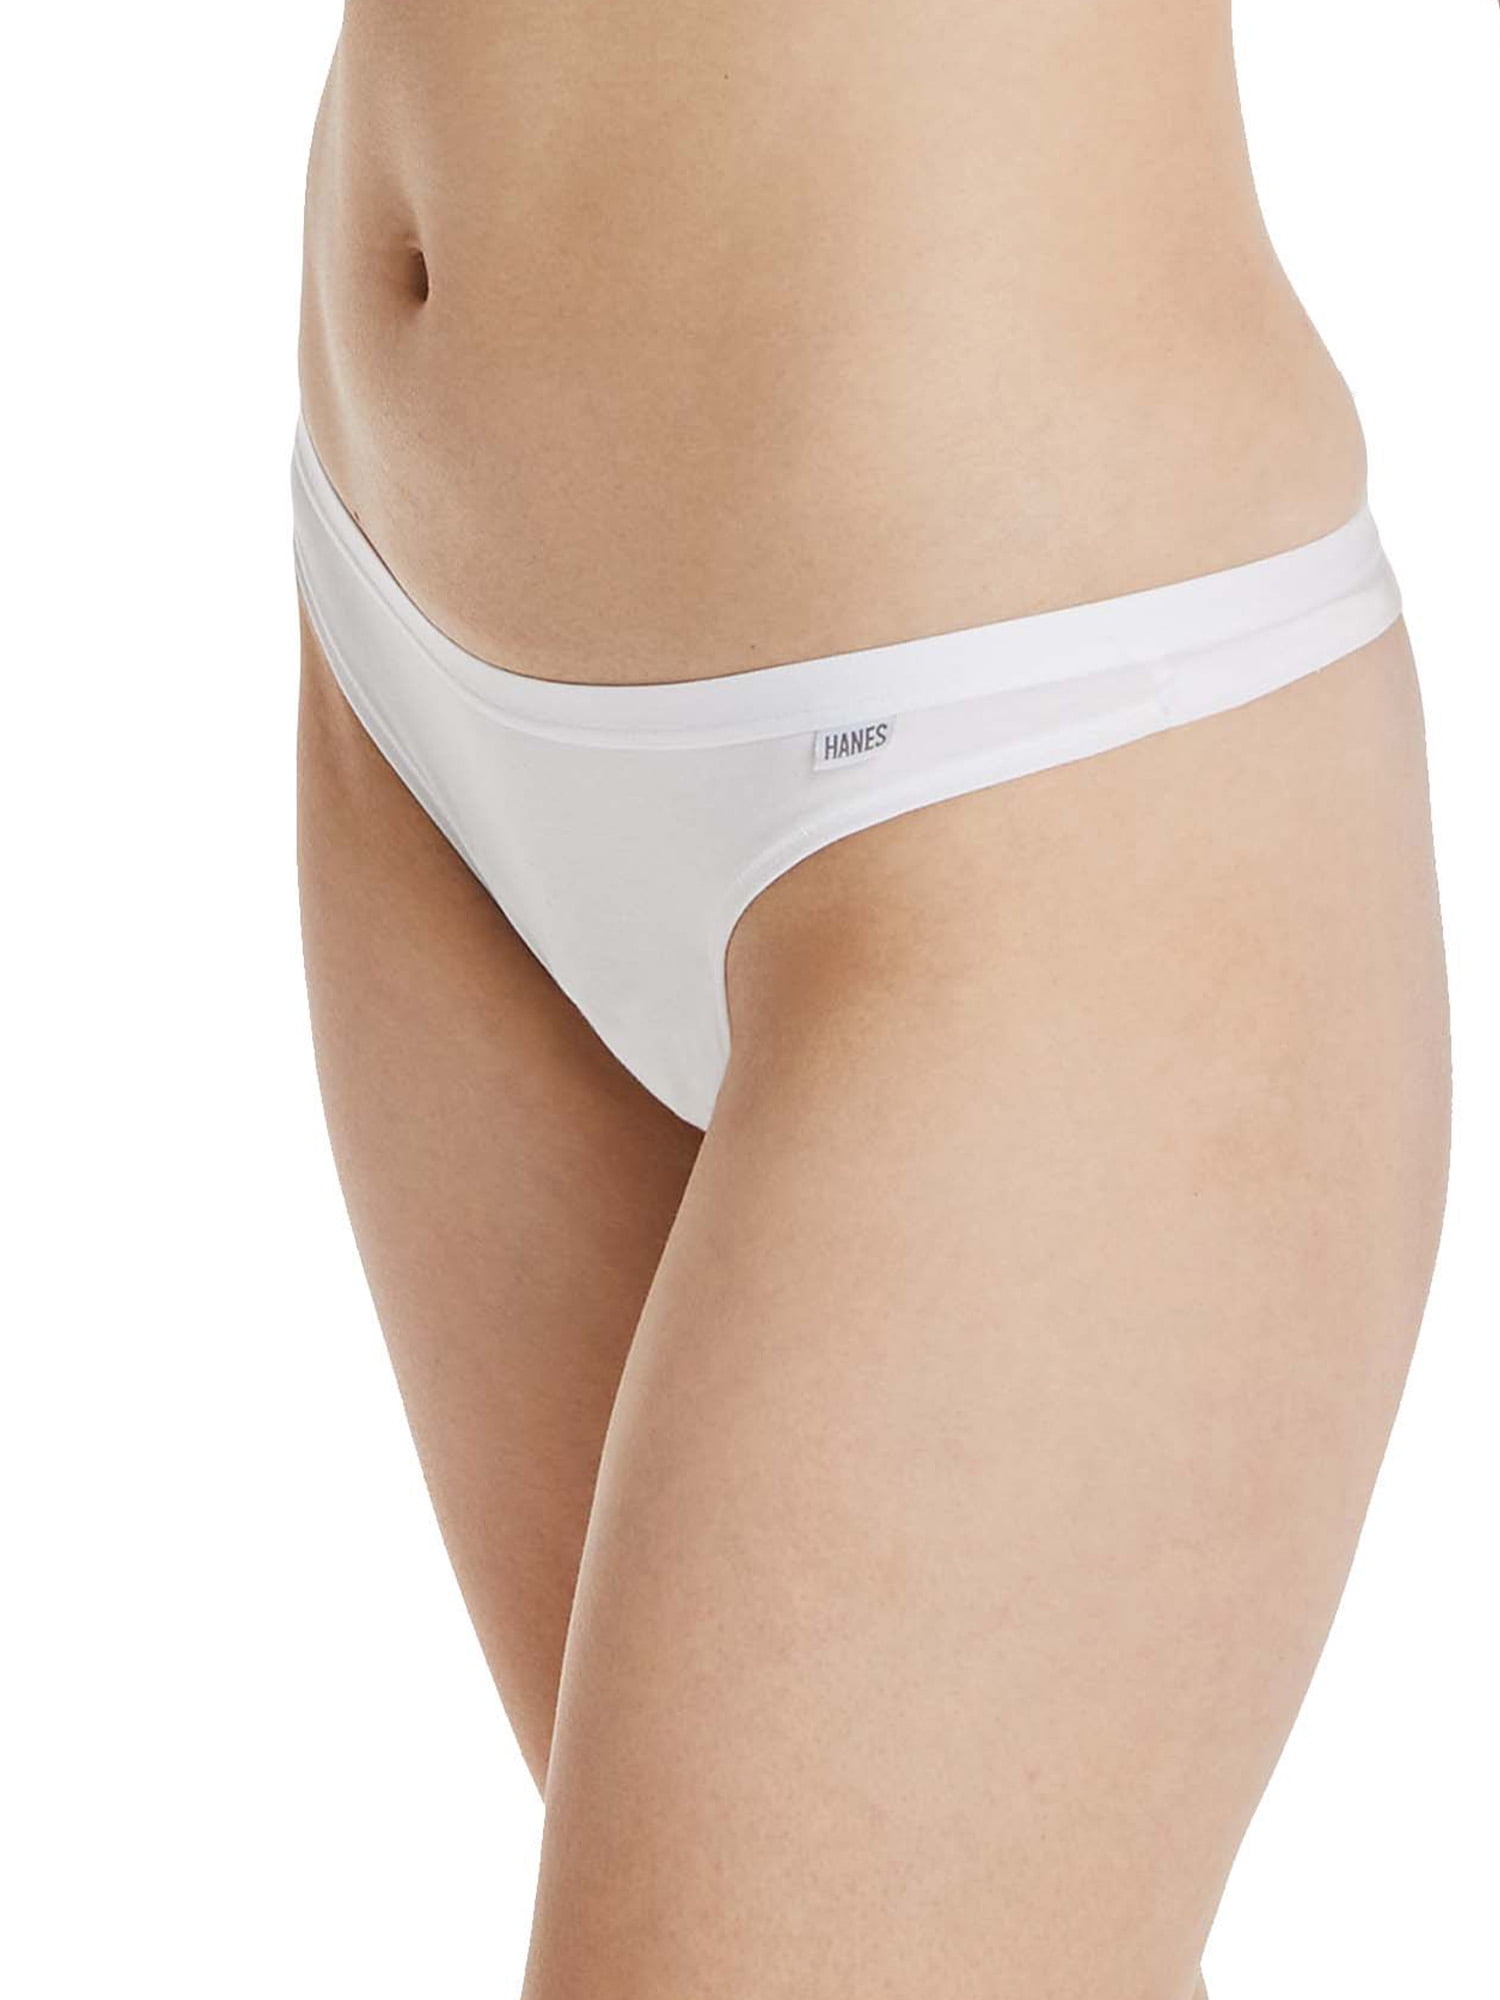 3-PACK OF HANES Ladies Womens Underwear WHITE Cotton G String Thong £10.99  - PicClick UK